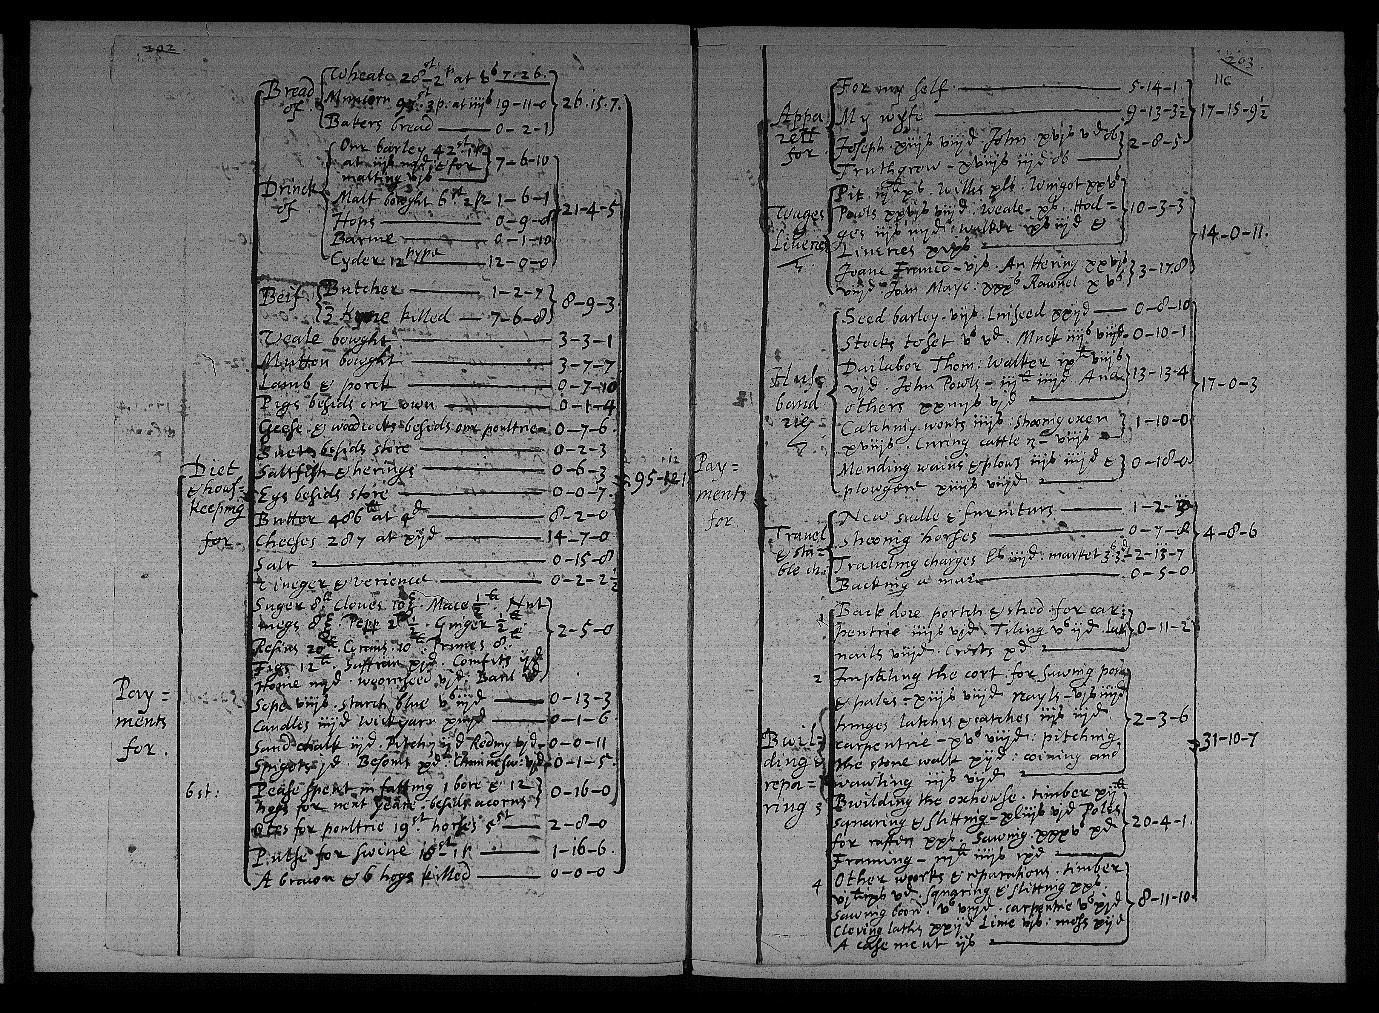 HERB Figure 2: An excerpt of John Coke’s summary account for 1612